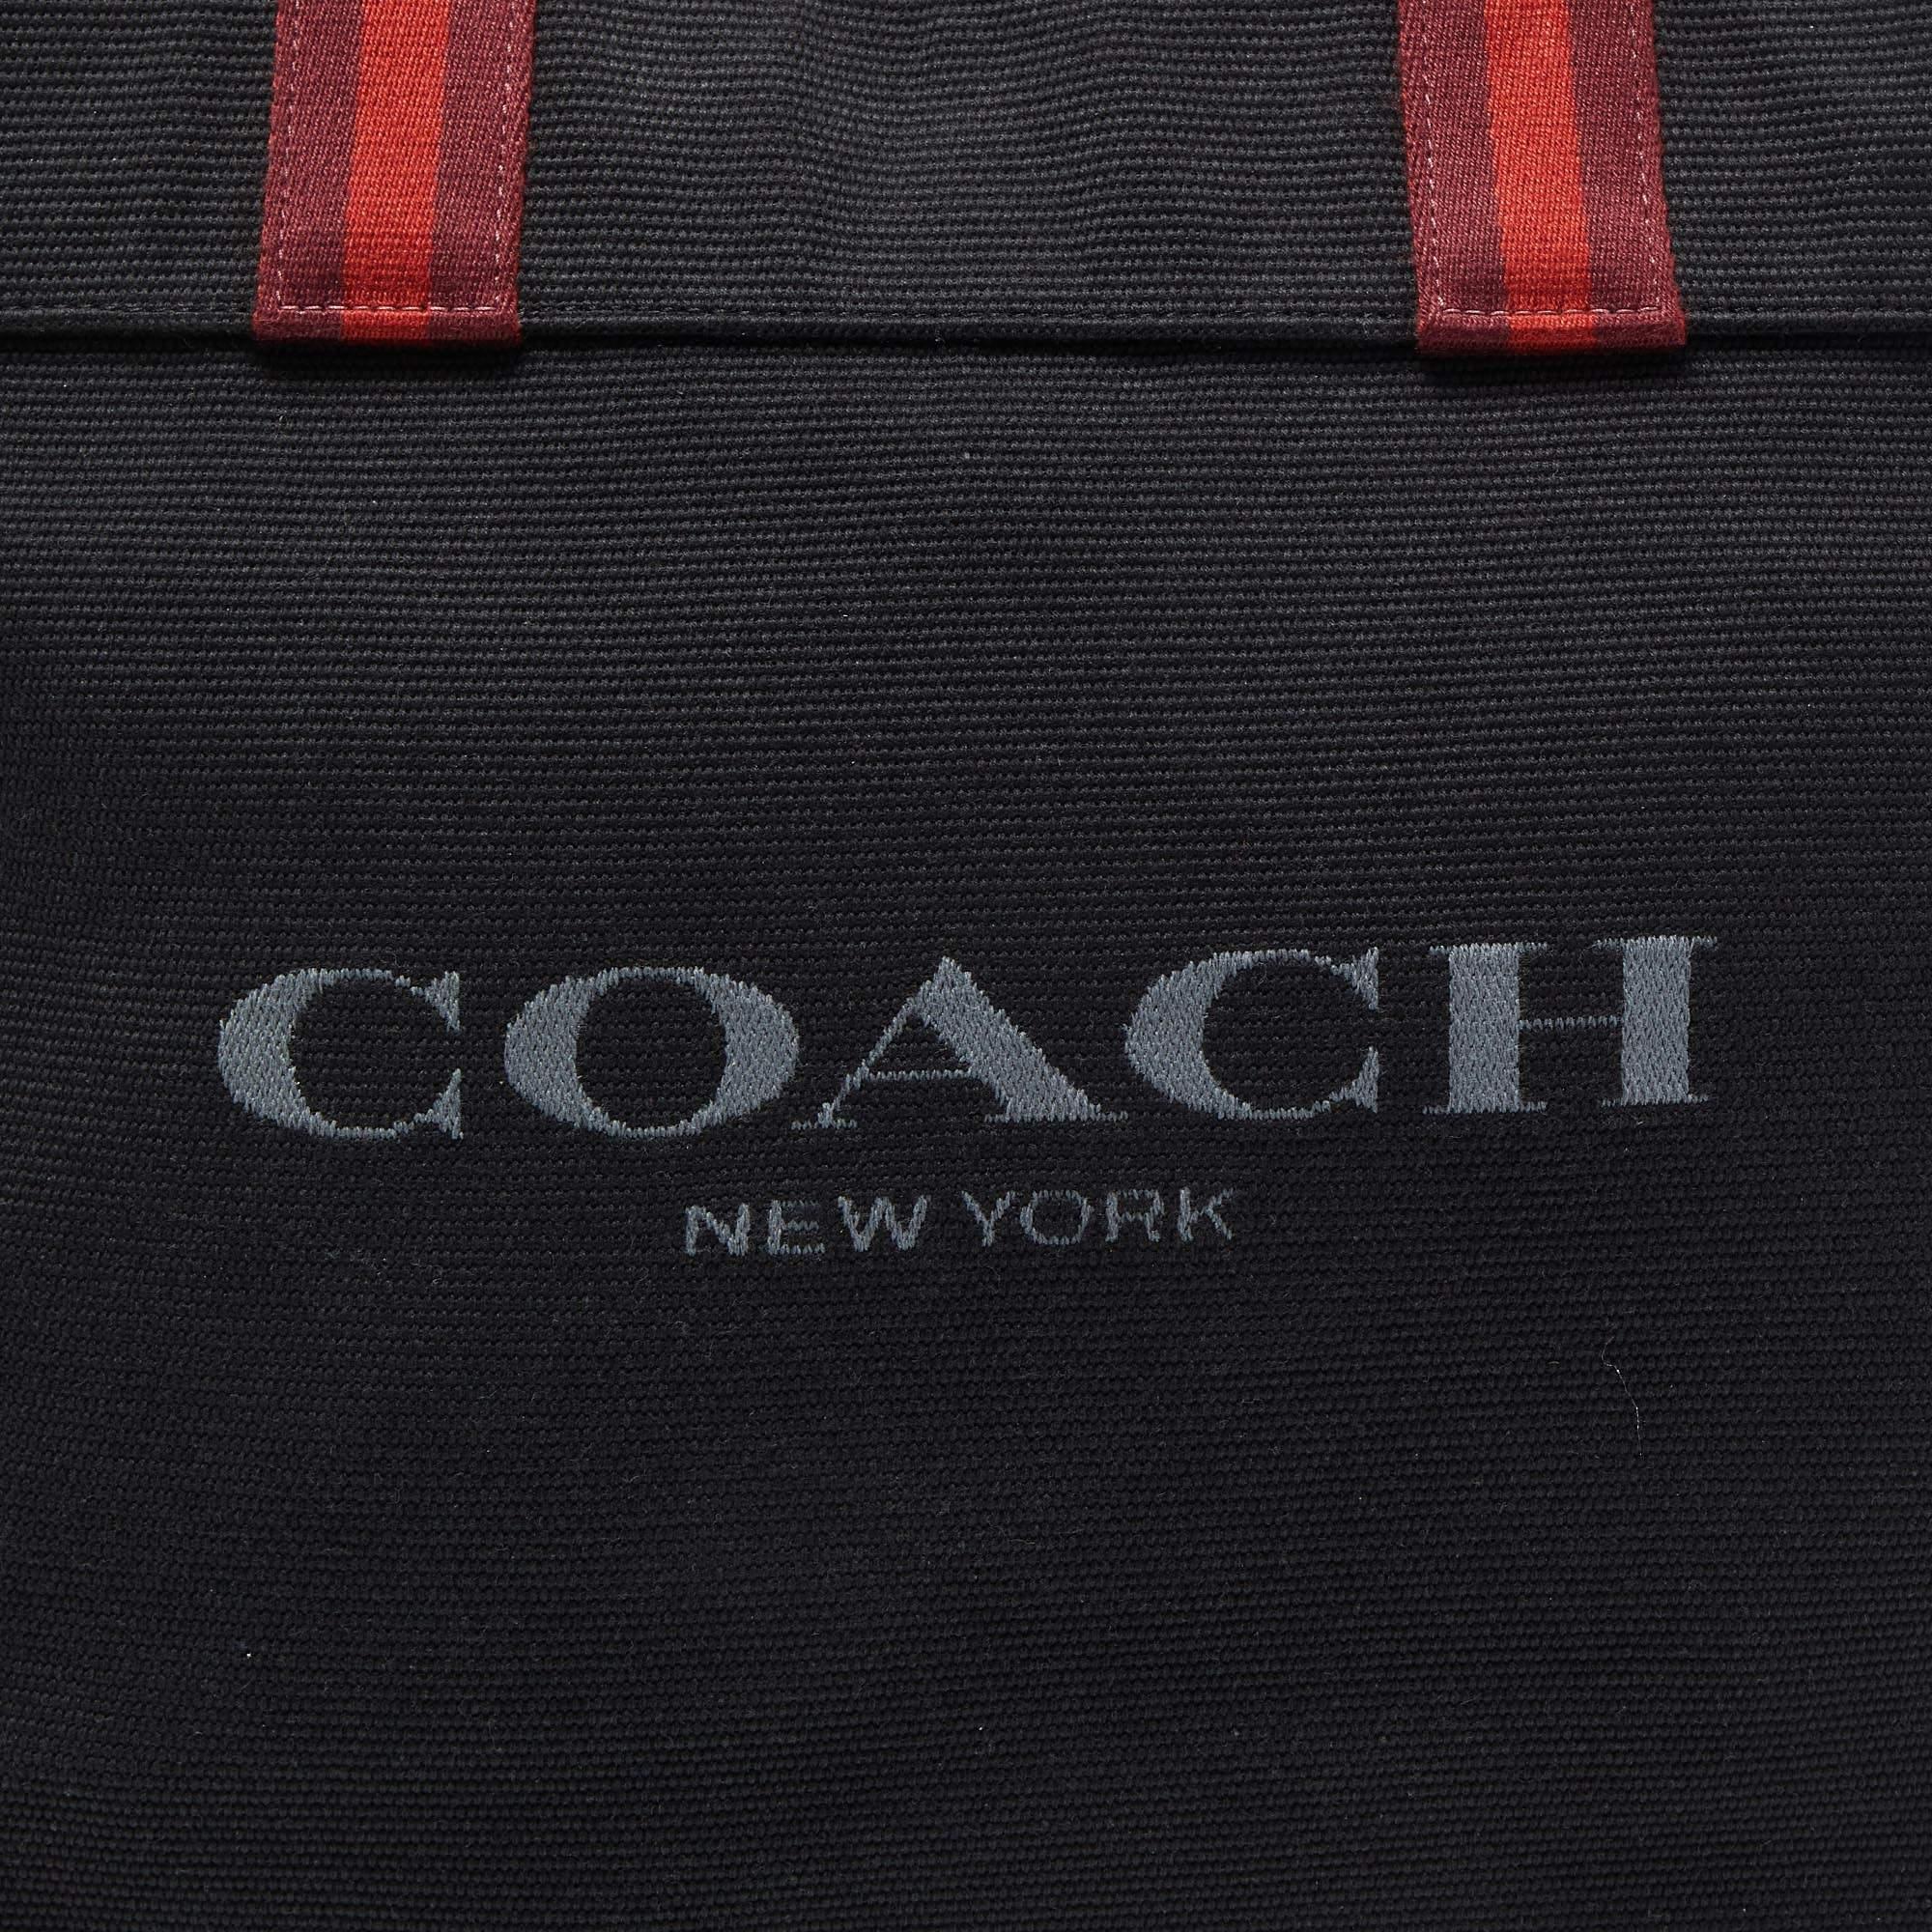 Coach Black/Burgundy Canvas and Leather 38 Tote For Sale 5